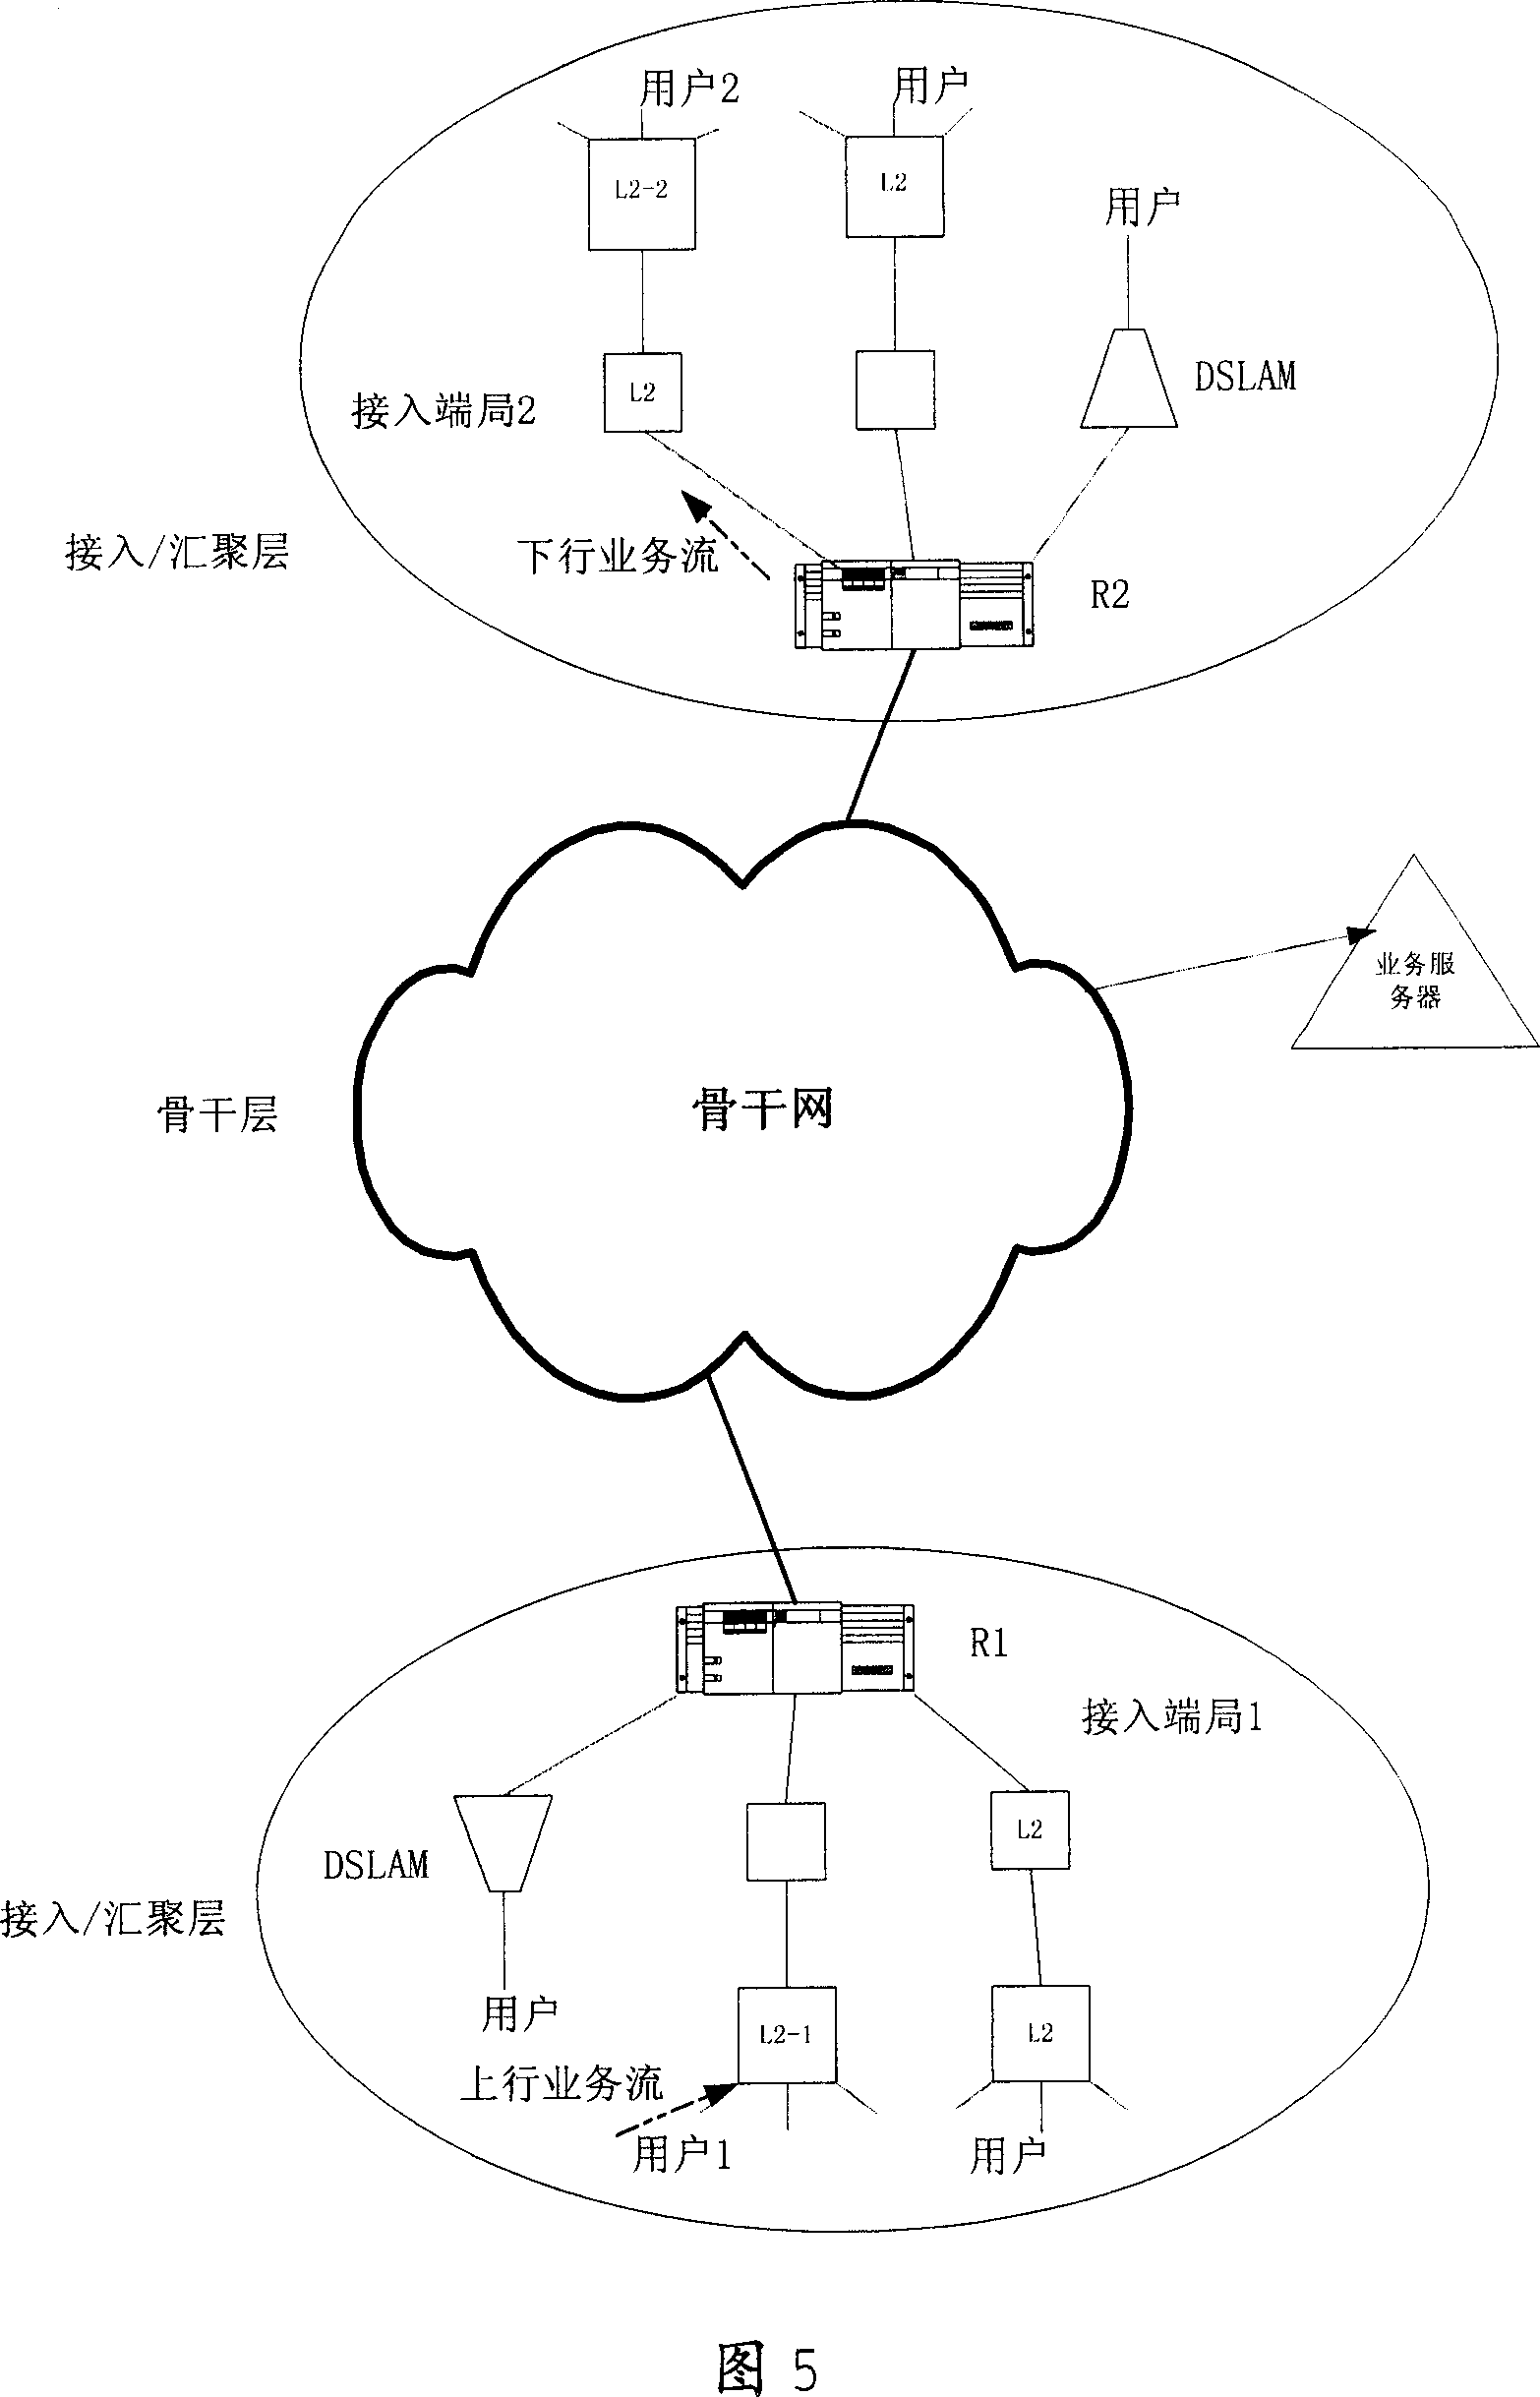 Method for ensuring QoS of IP access network service